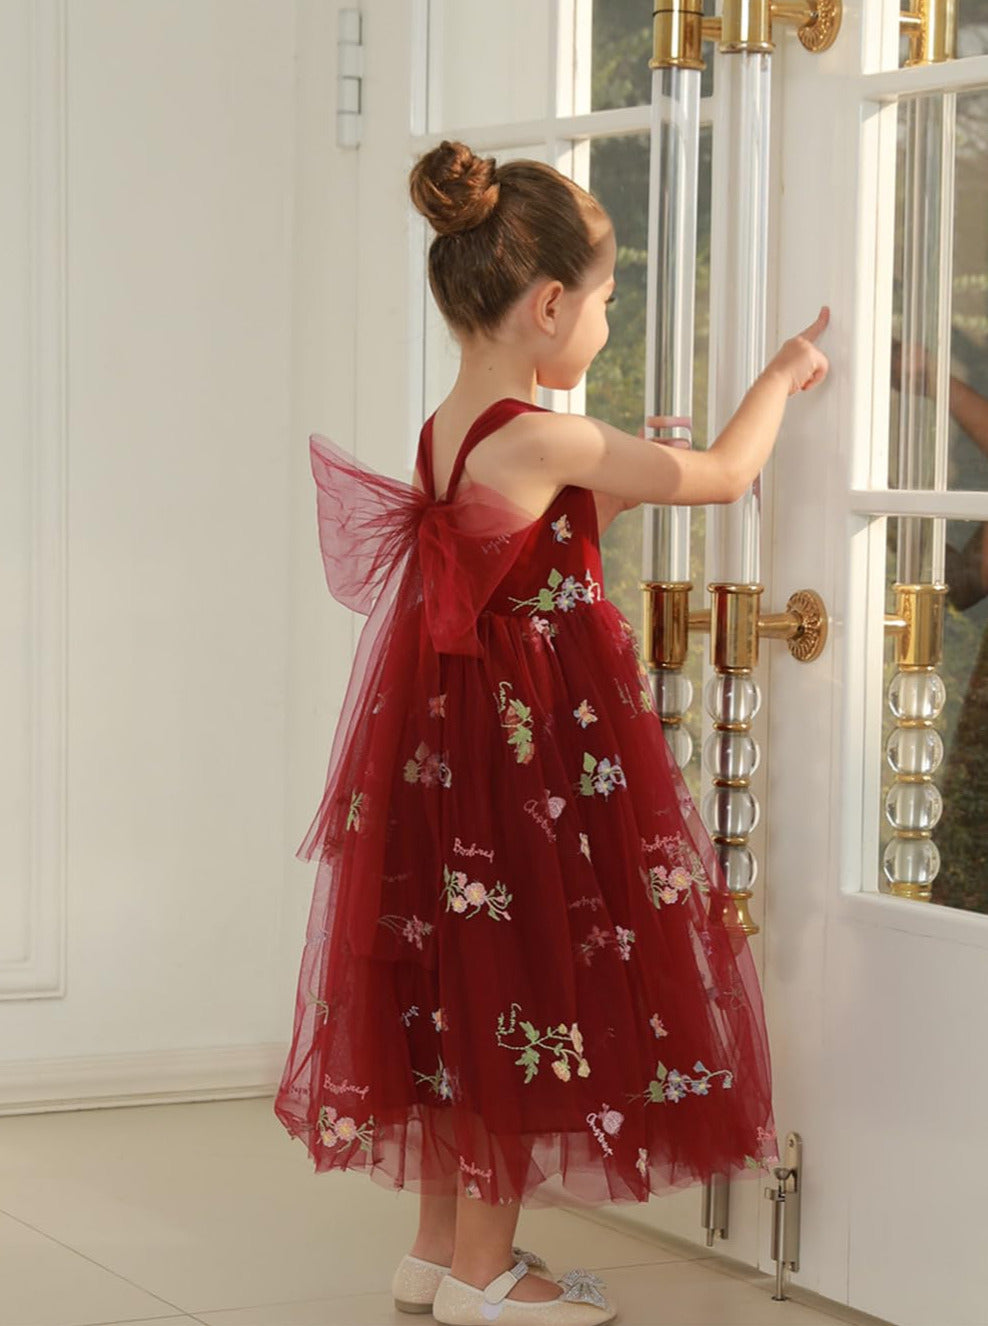 Floral Embroidered Tulle Girl Dress in Wine